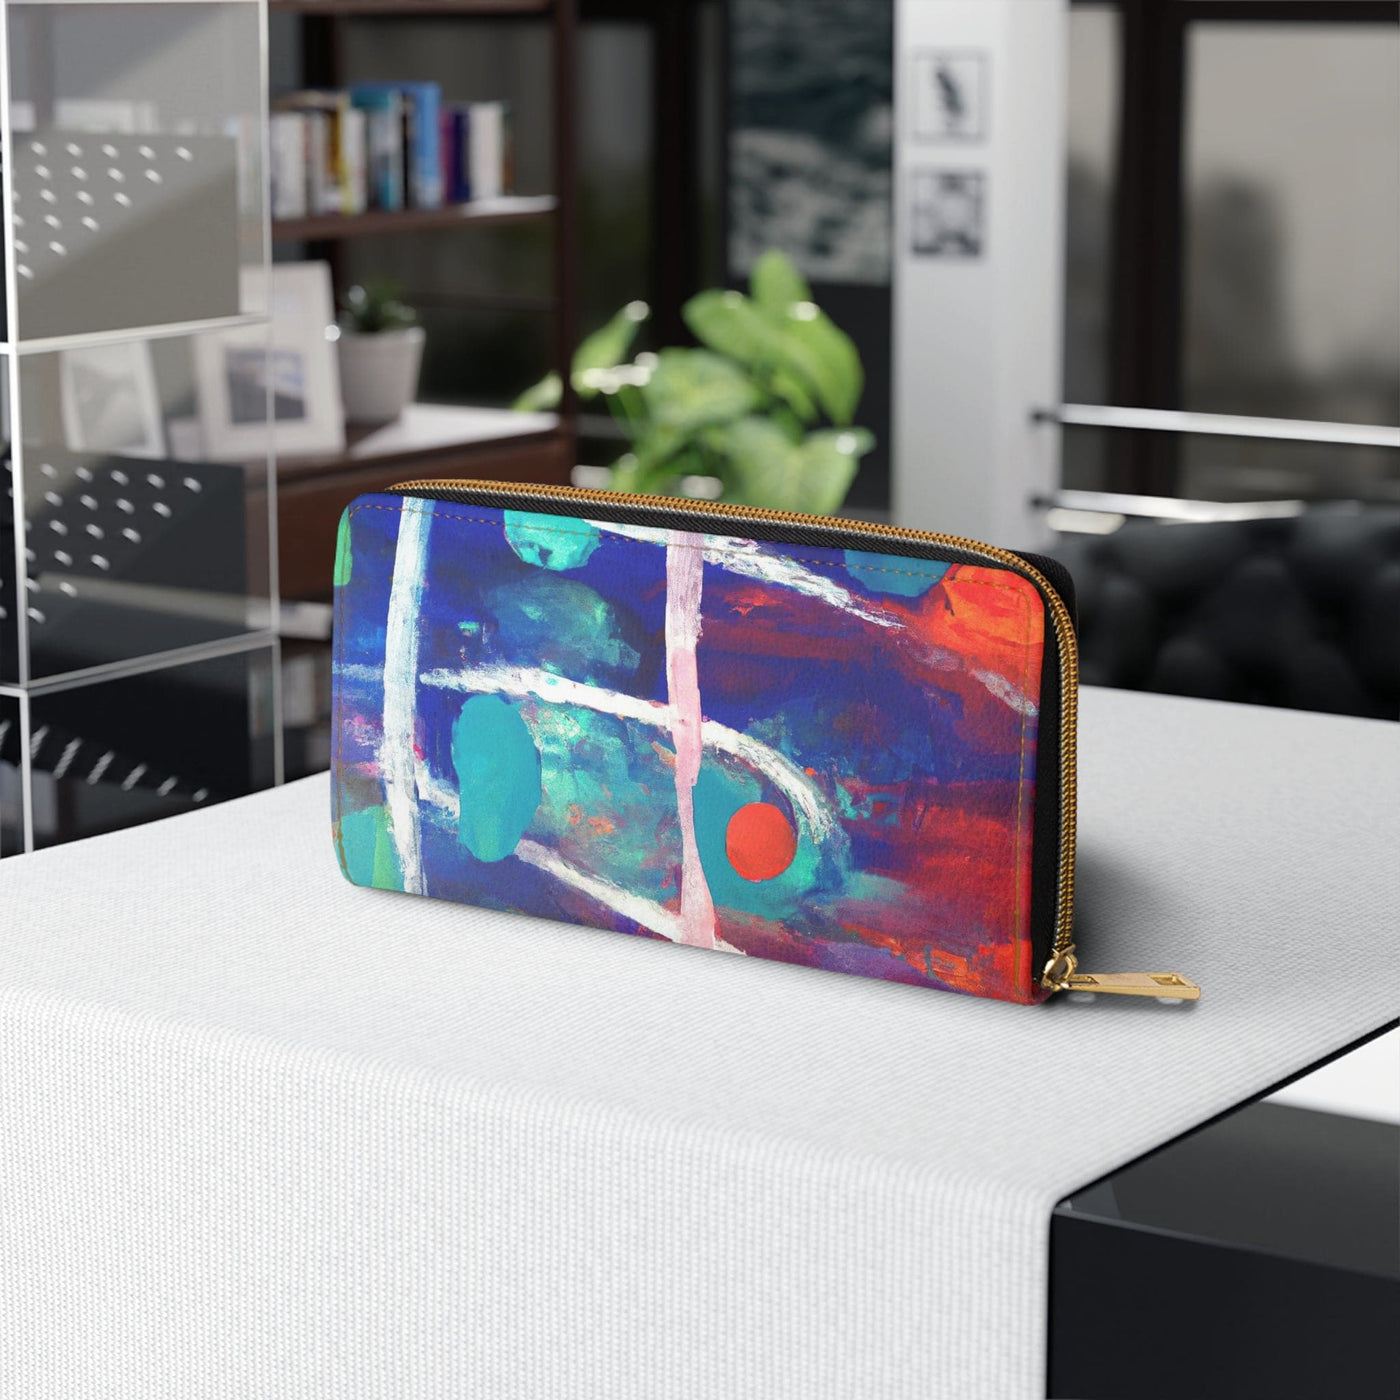 Multicolor Abstract Expression Pattern Womens Zipper Wallet Clutch Purse - Bags